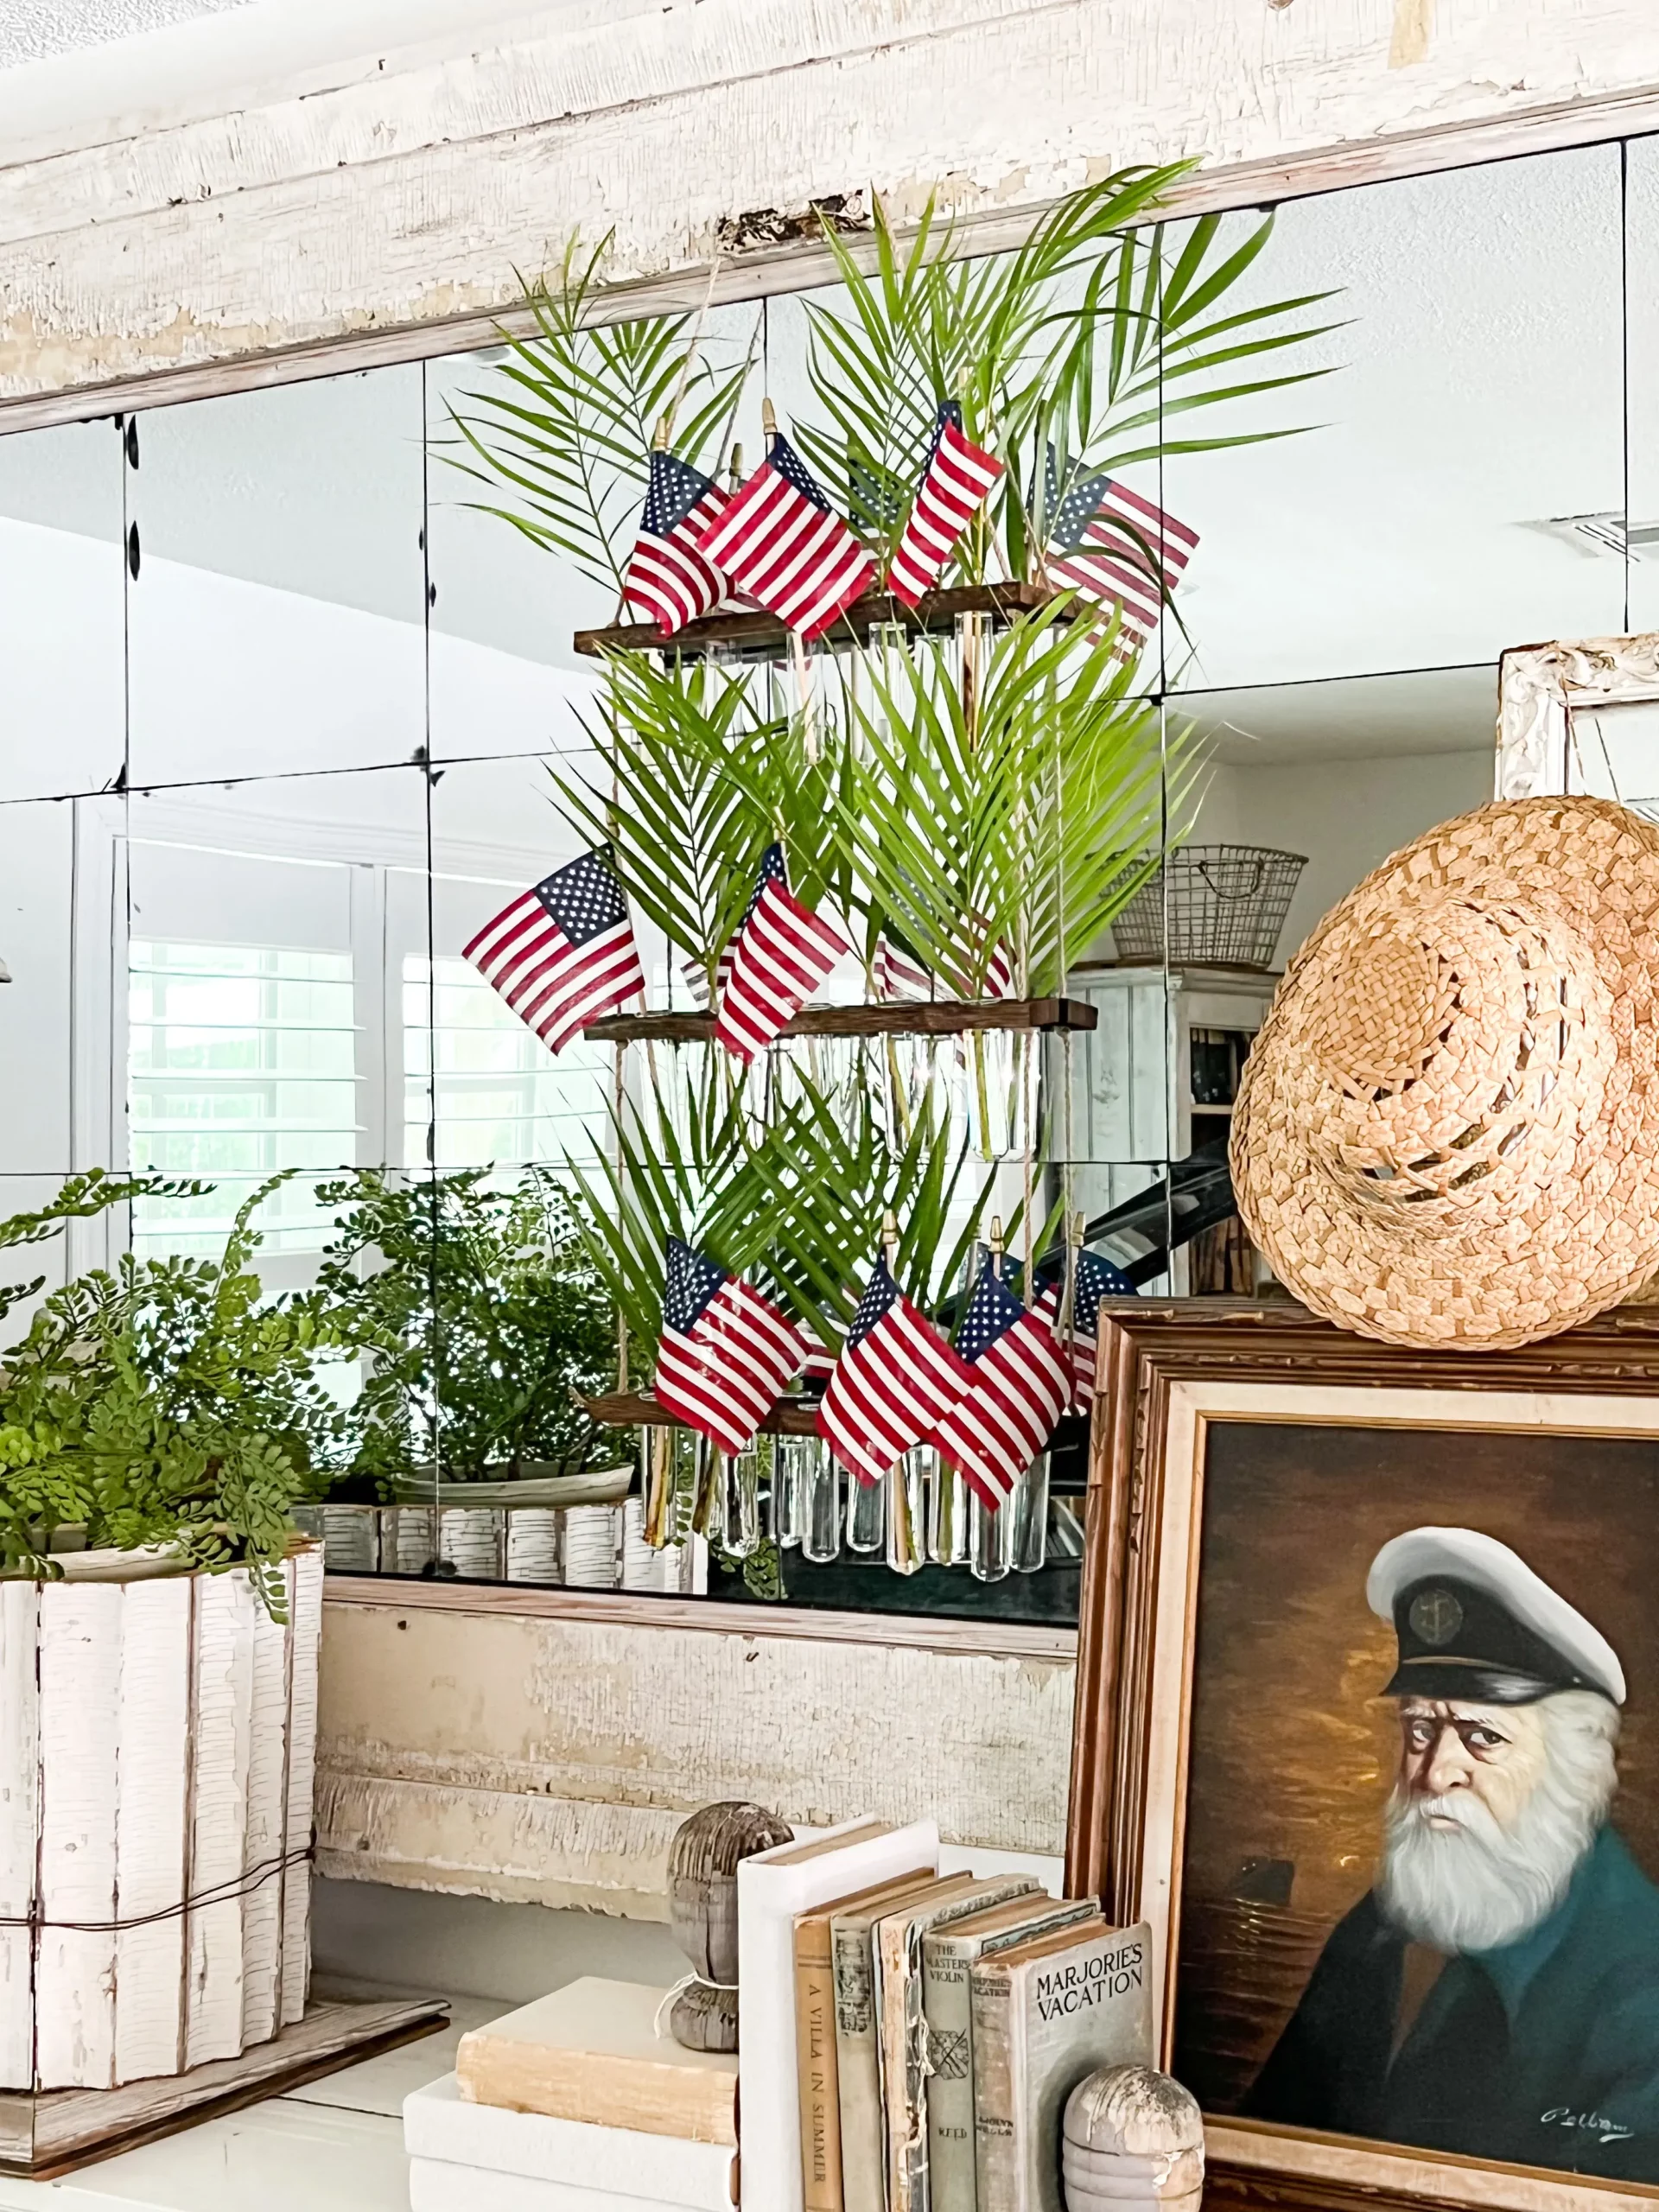 hanging wall vases holding palm fronds and flags for Memorial Day and Fourth of July